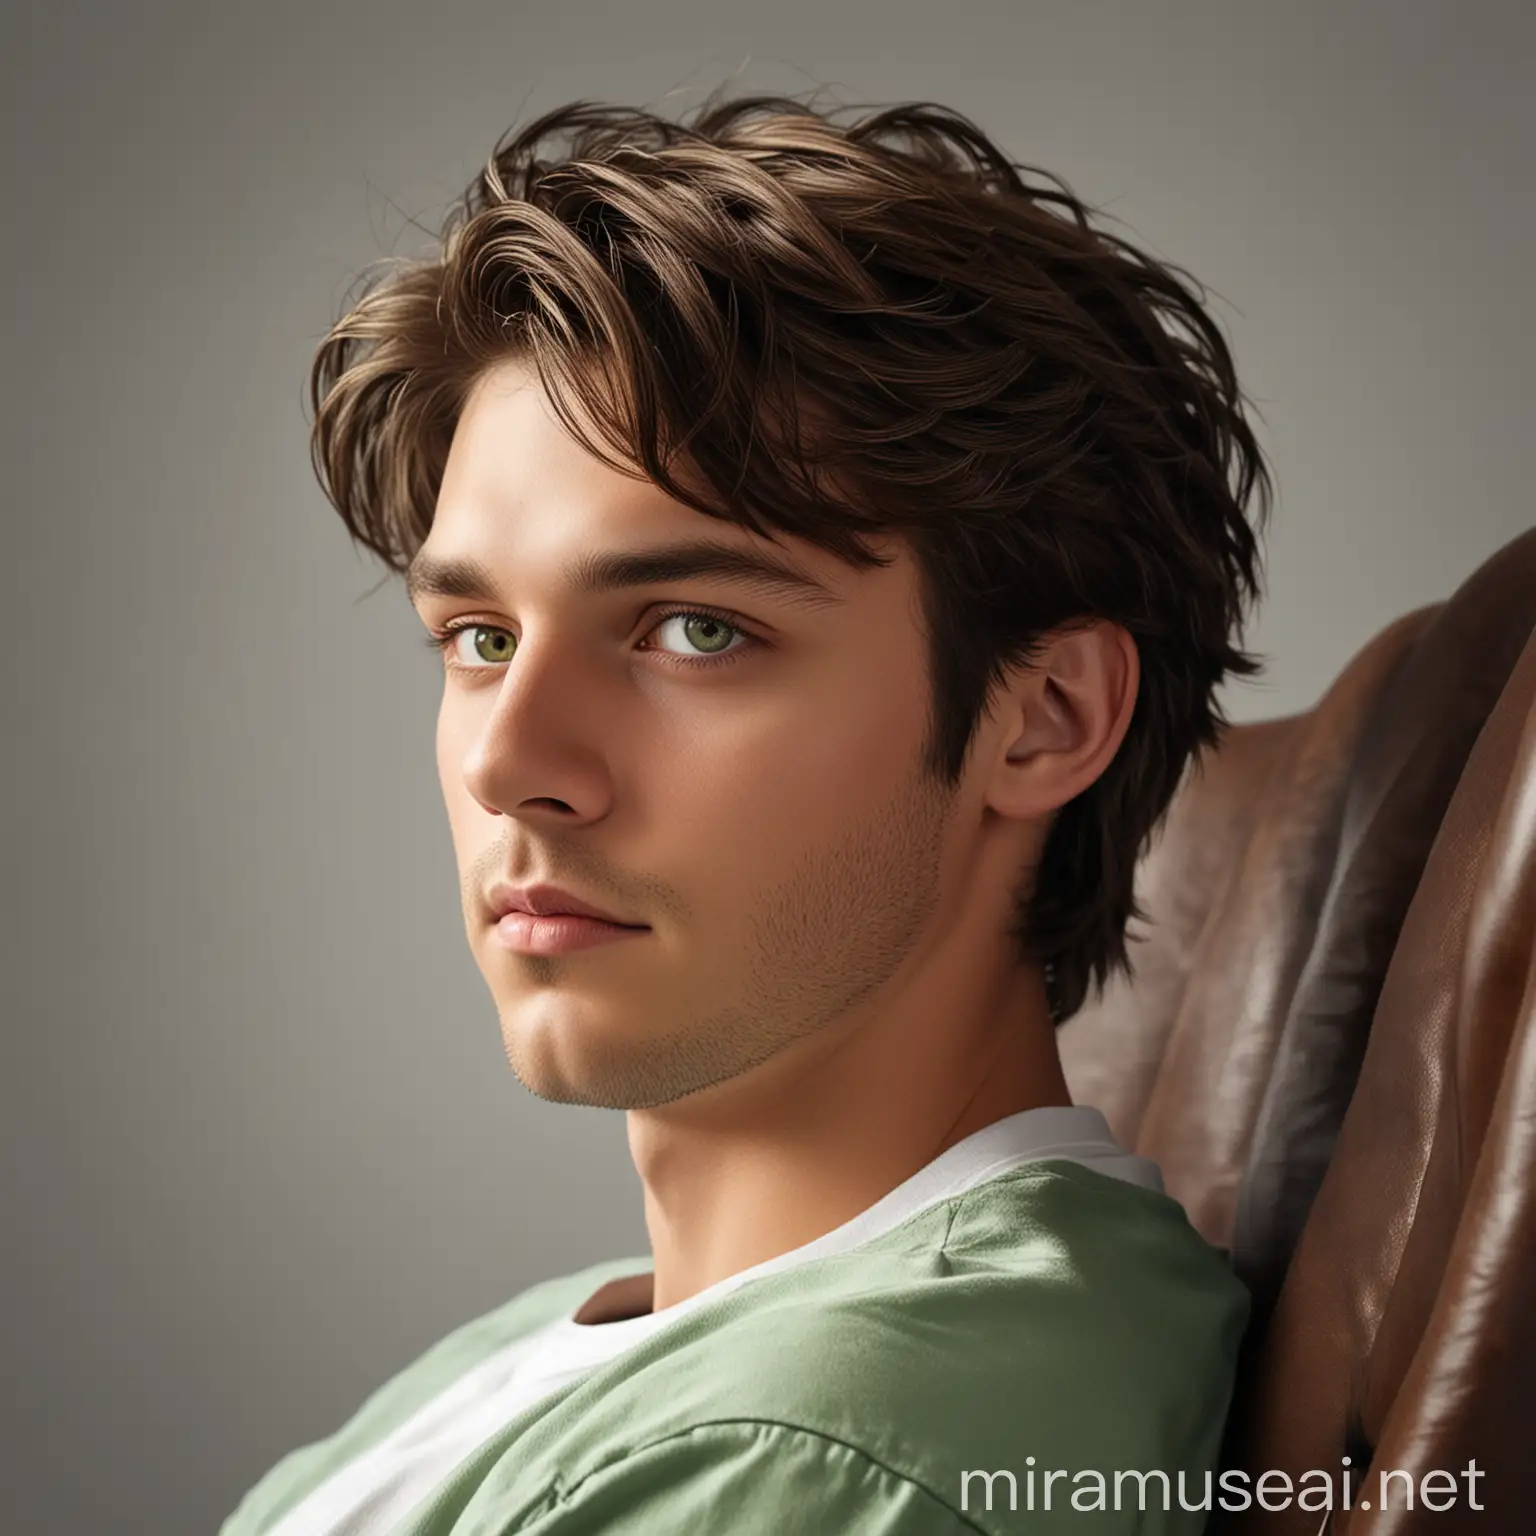 Hyper realistic photo of eighteen year guy, dark brown hair, with highlights, green eyes, angel face, resting in chair bright light overhead, profile view